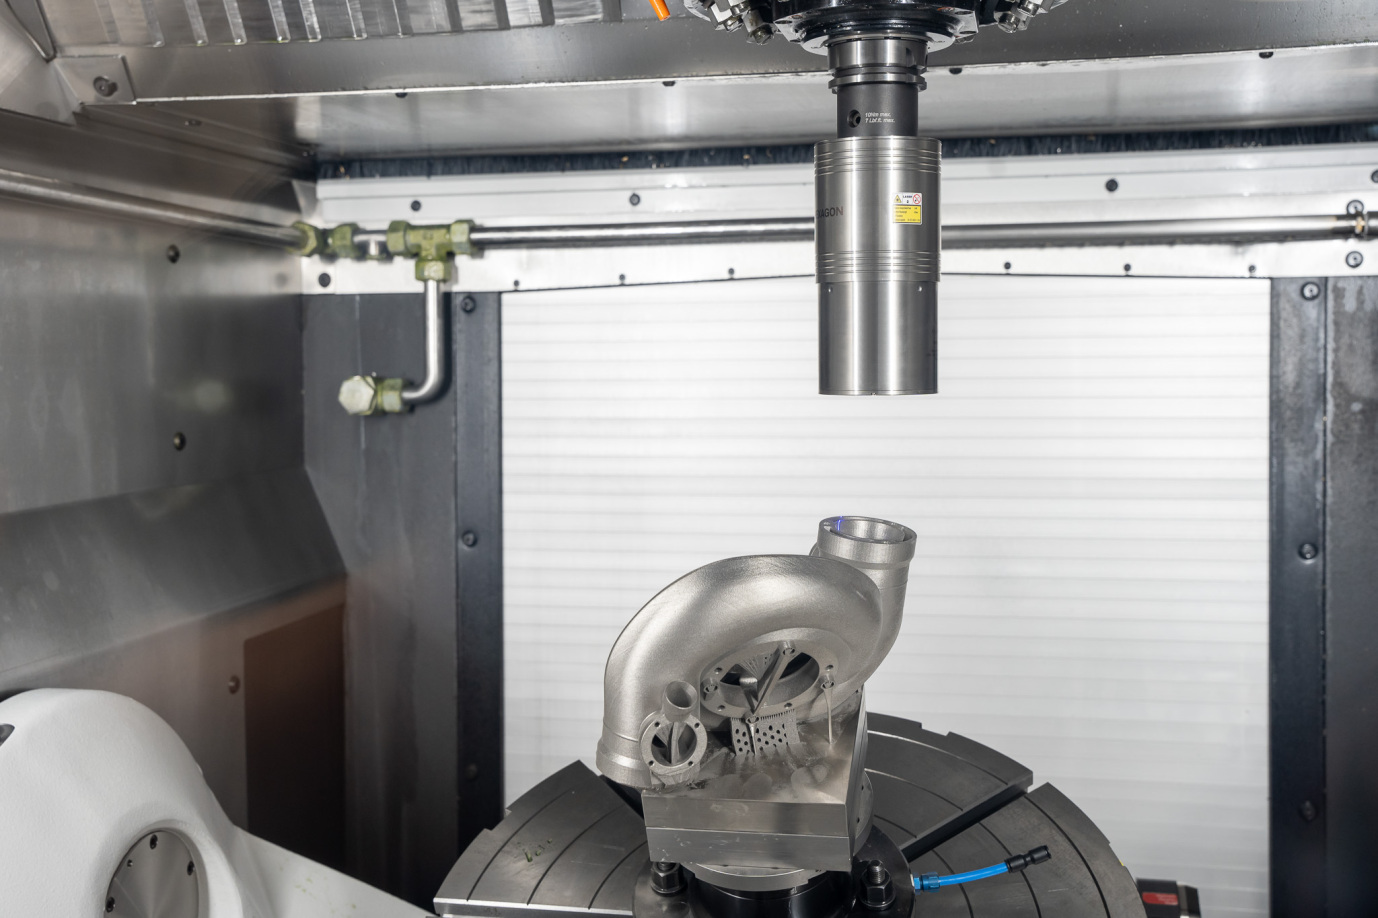 Laser scanning closes the digital gap in 3D printing and high-end milling workflow